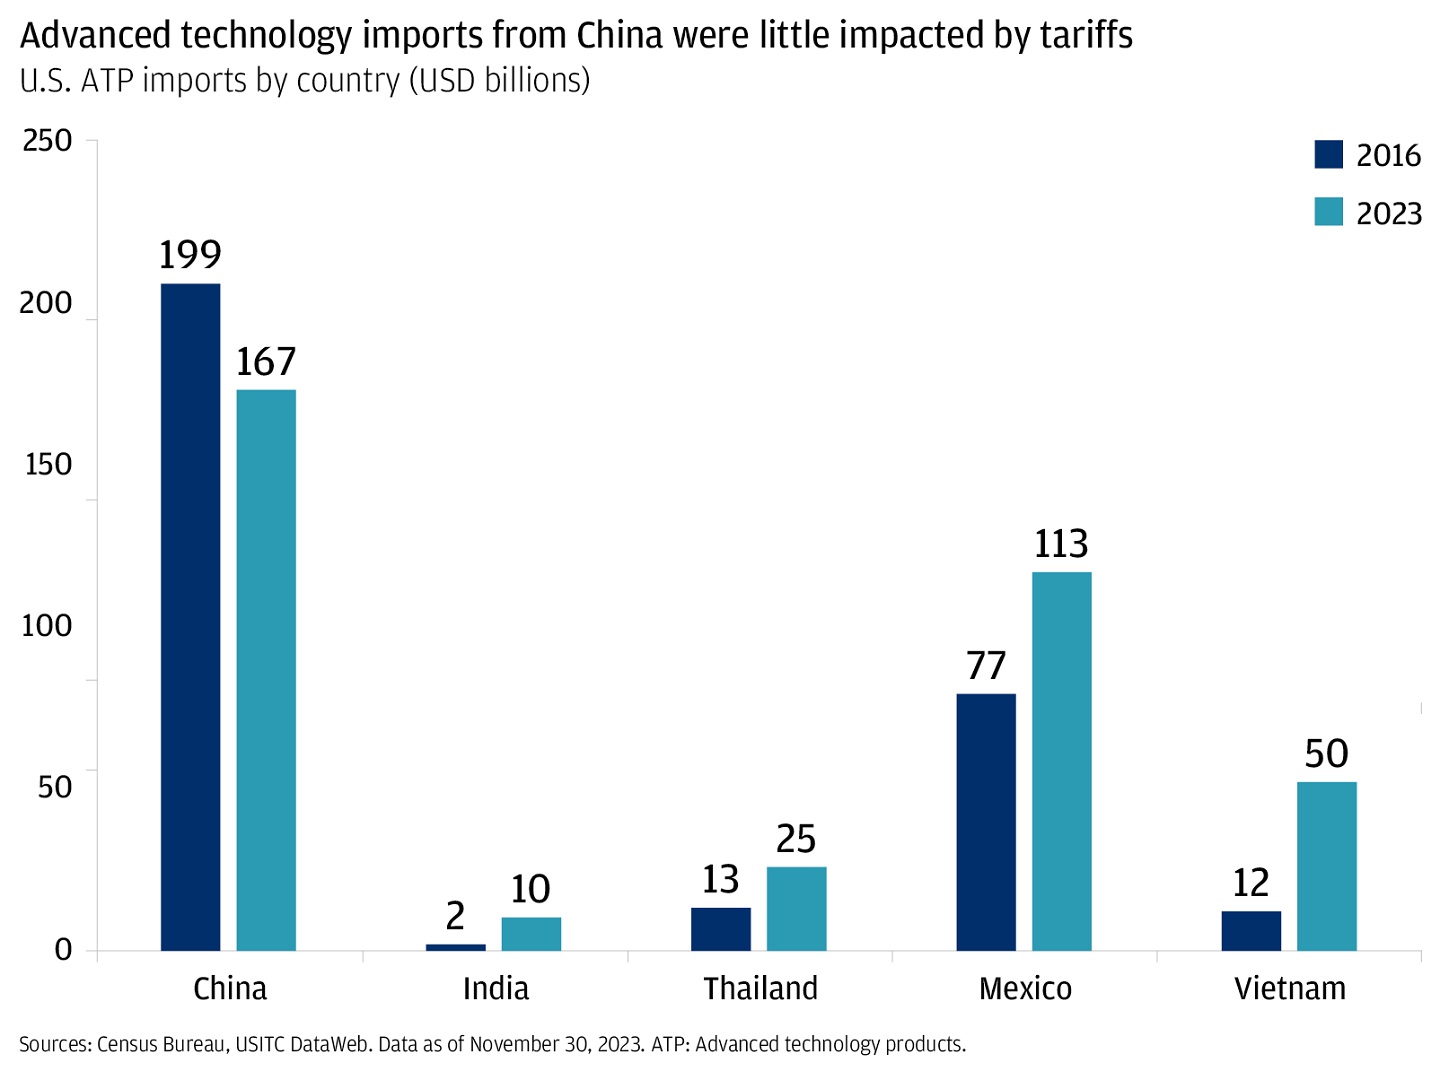 The bar graph describes the U.S. Advanced Technology Products imports by country in USD billion.